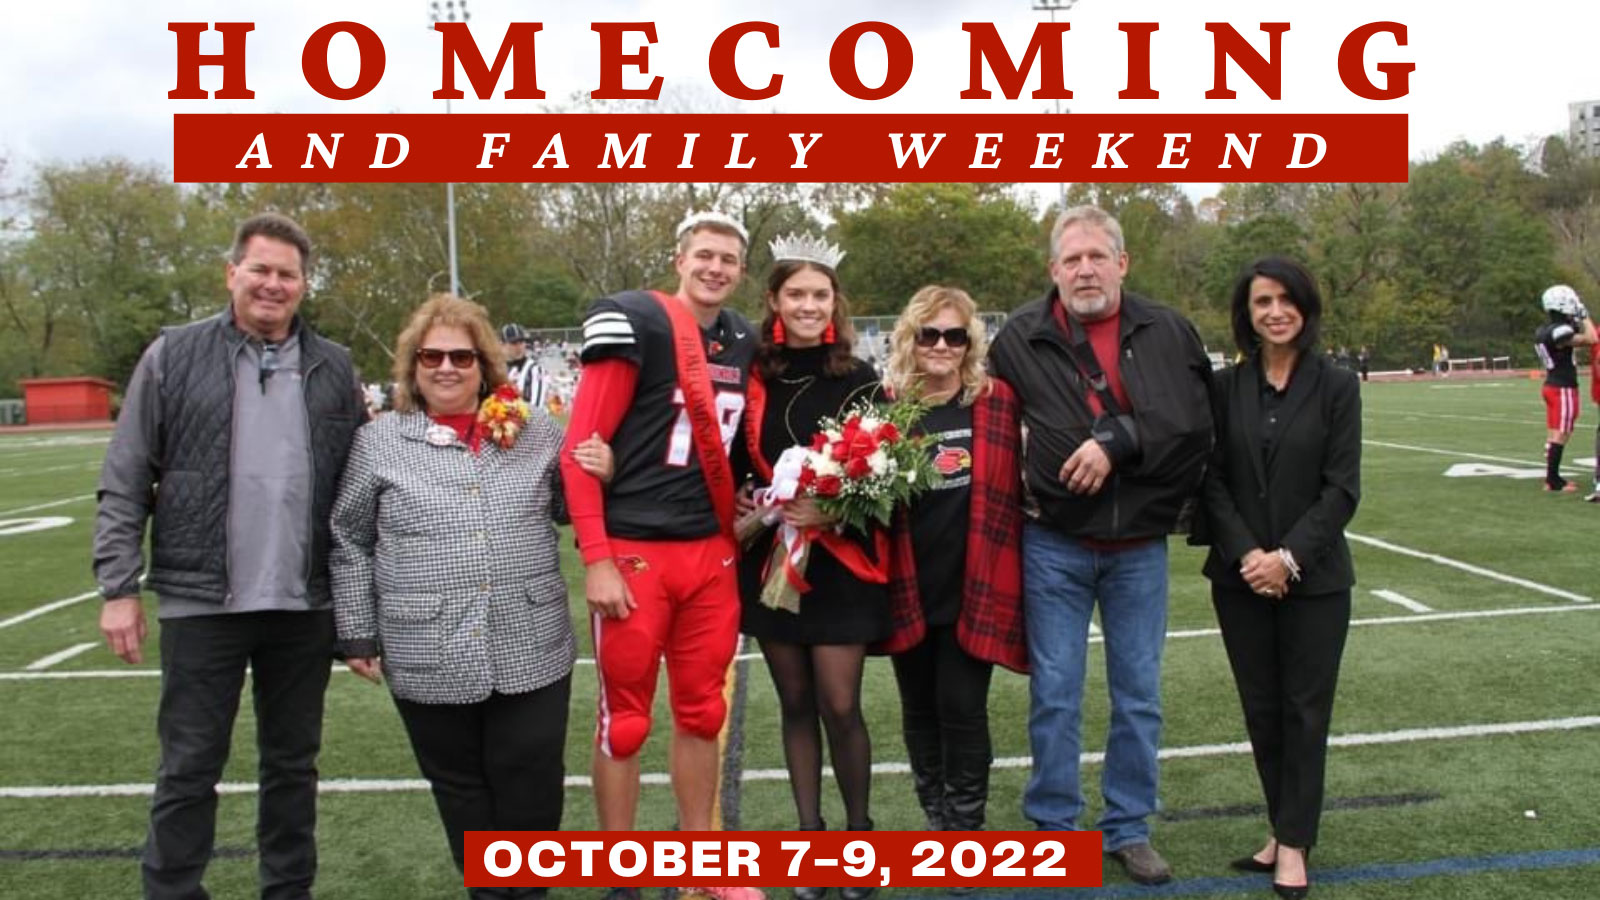 Homecoming and Family Weekend - October 7-9, 2022